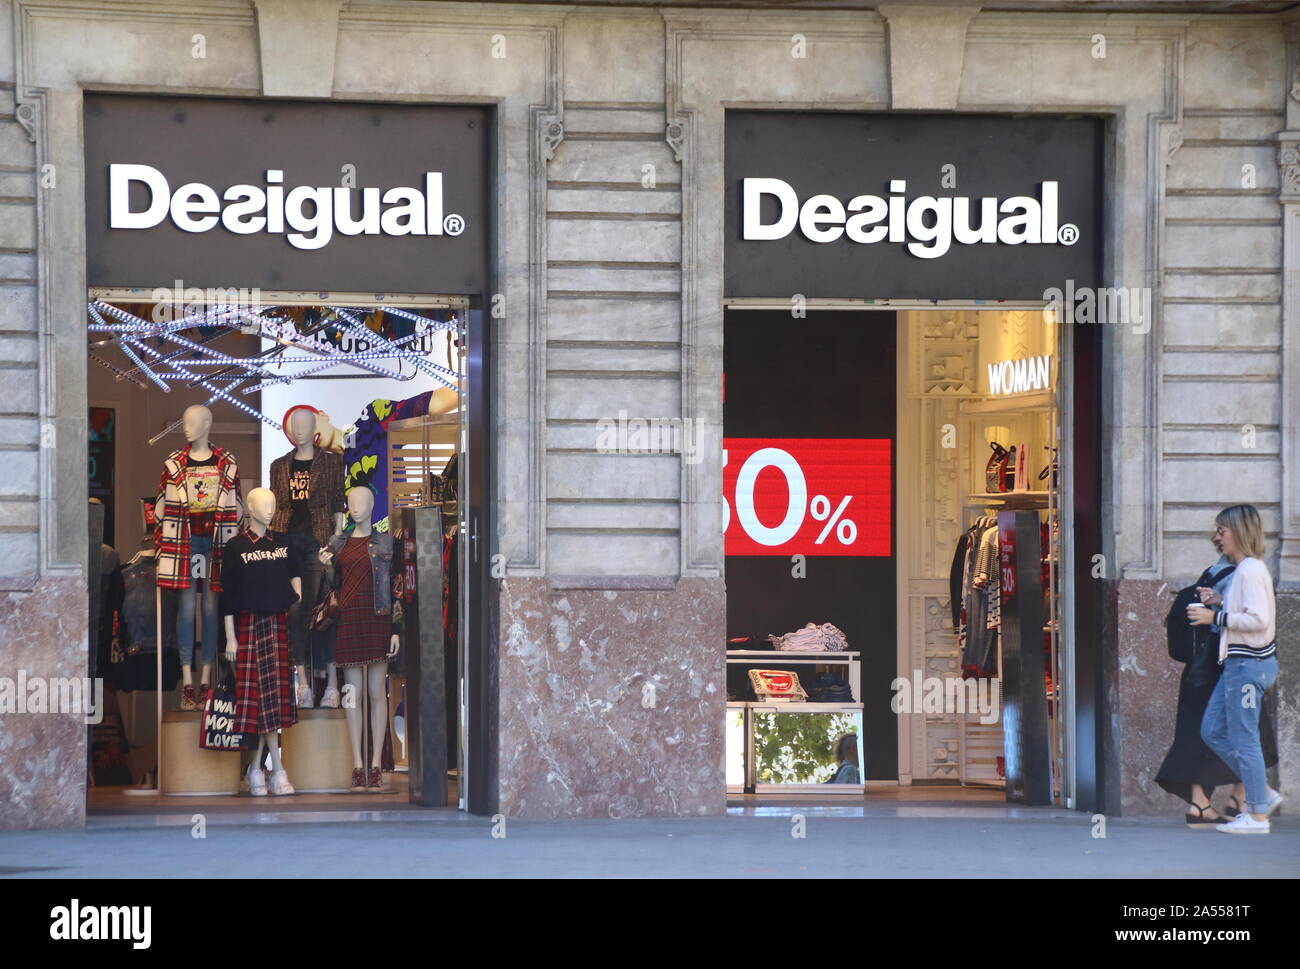 Desigual Logo In High Resolution Stock Photography and Images - Alamy